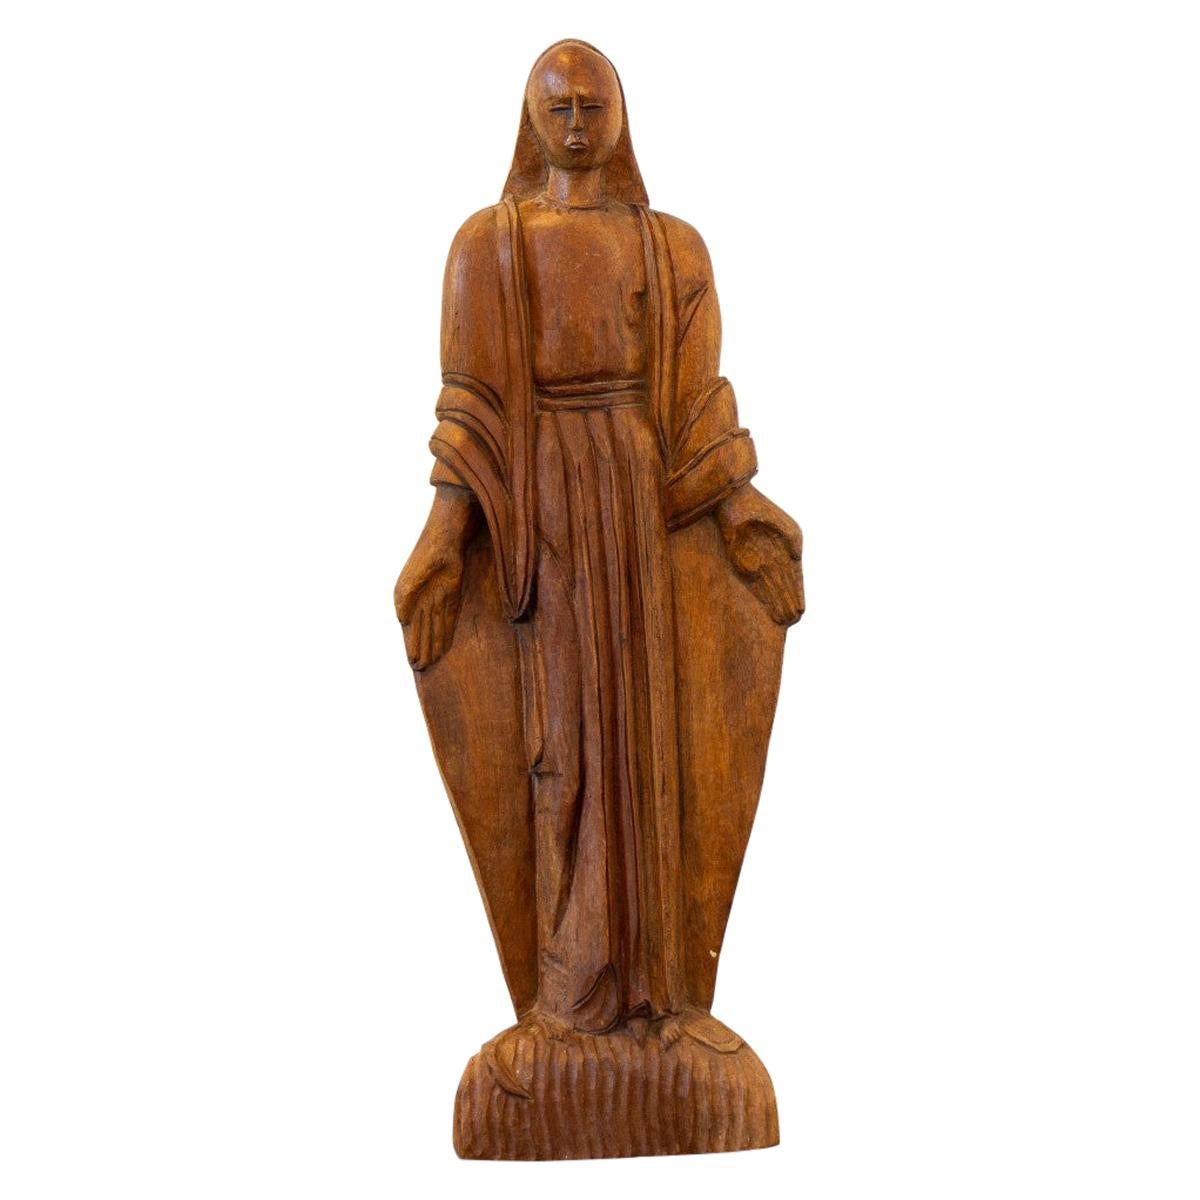 Mexican Carved Wooden Figure of an Evangelical Woman, 1920s